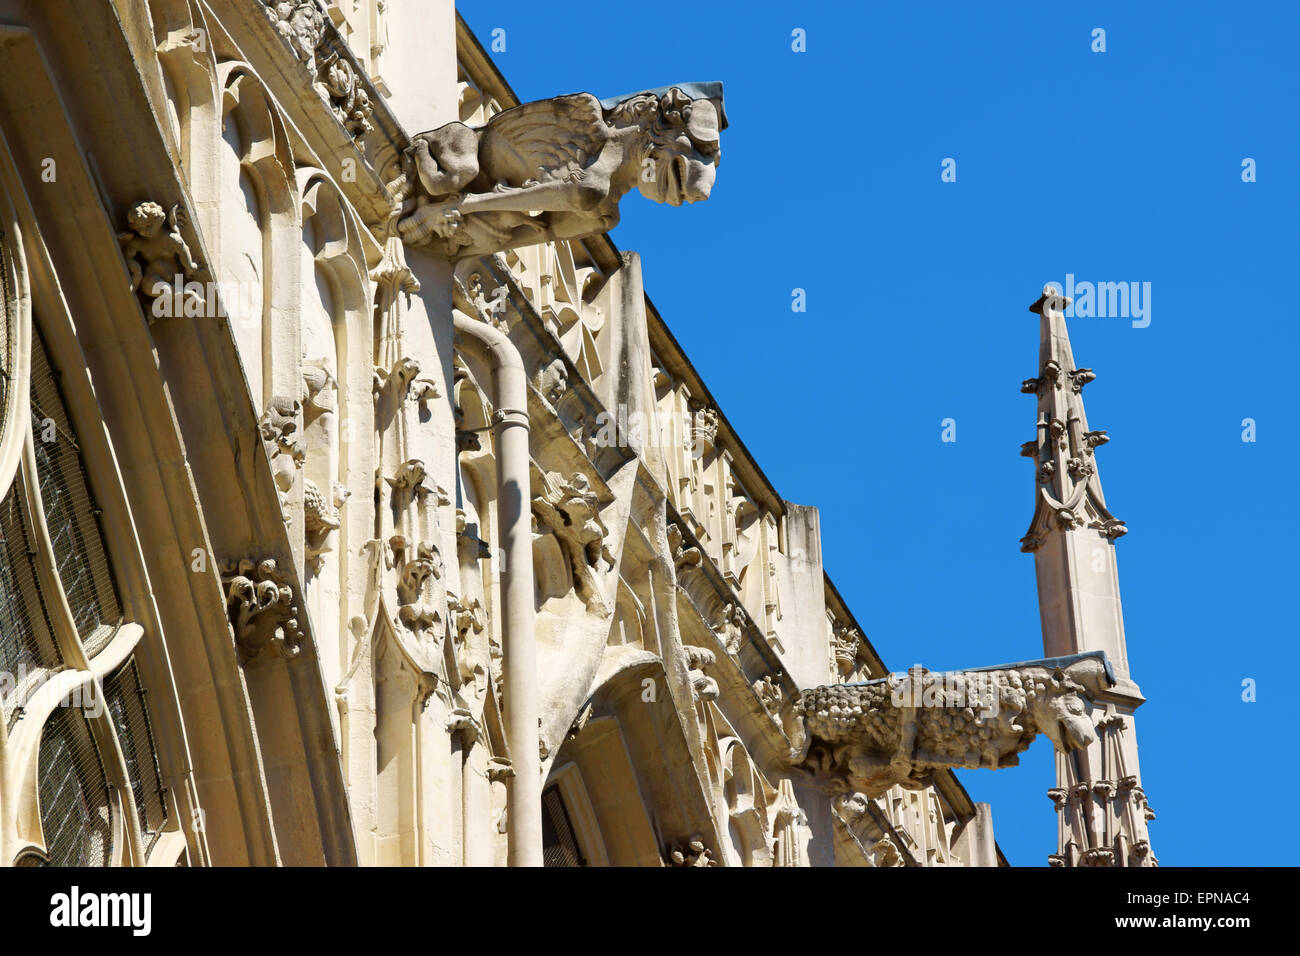 Details and gargoyles of the Gothic Saint-Urbain Basilica built in the thirteenth century Troyes, Aube, France Stock Photo